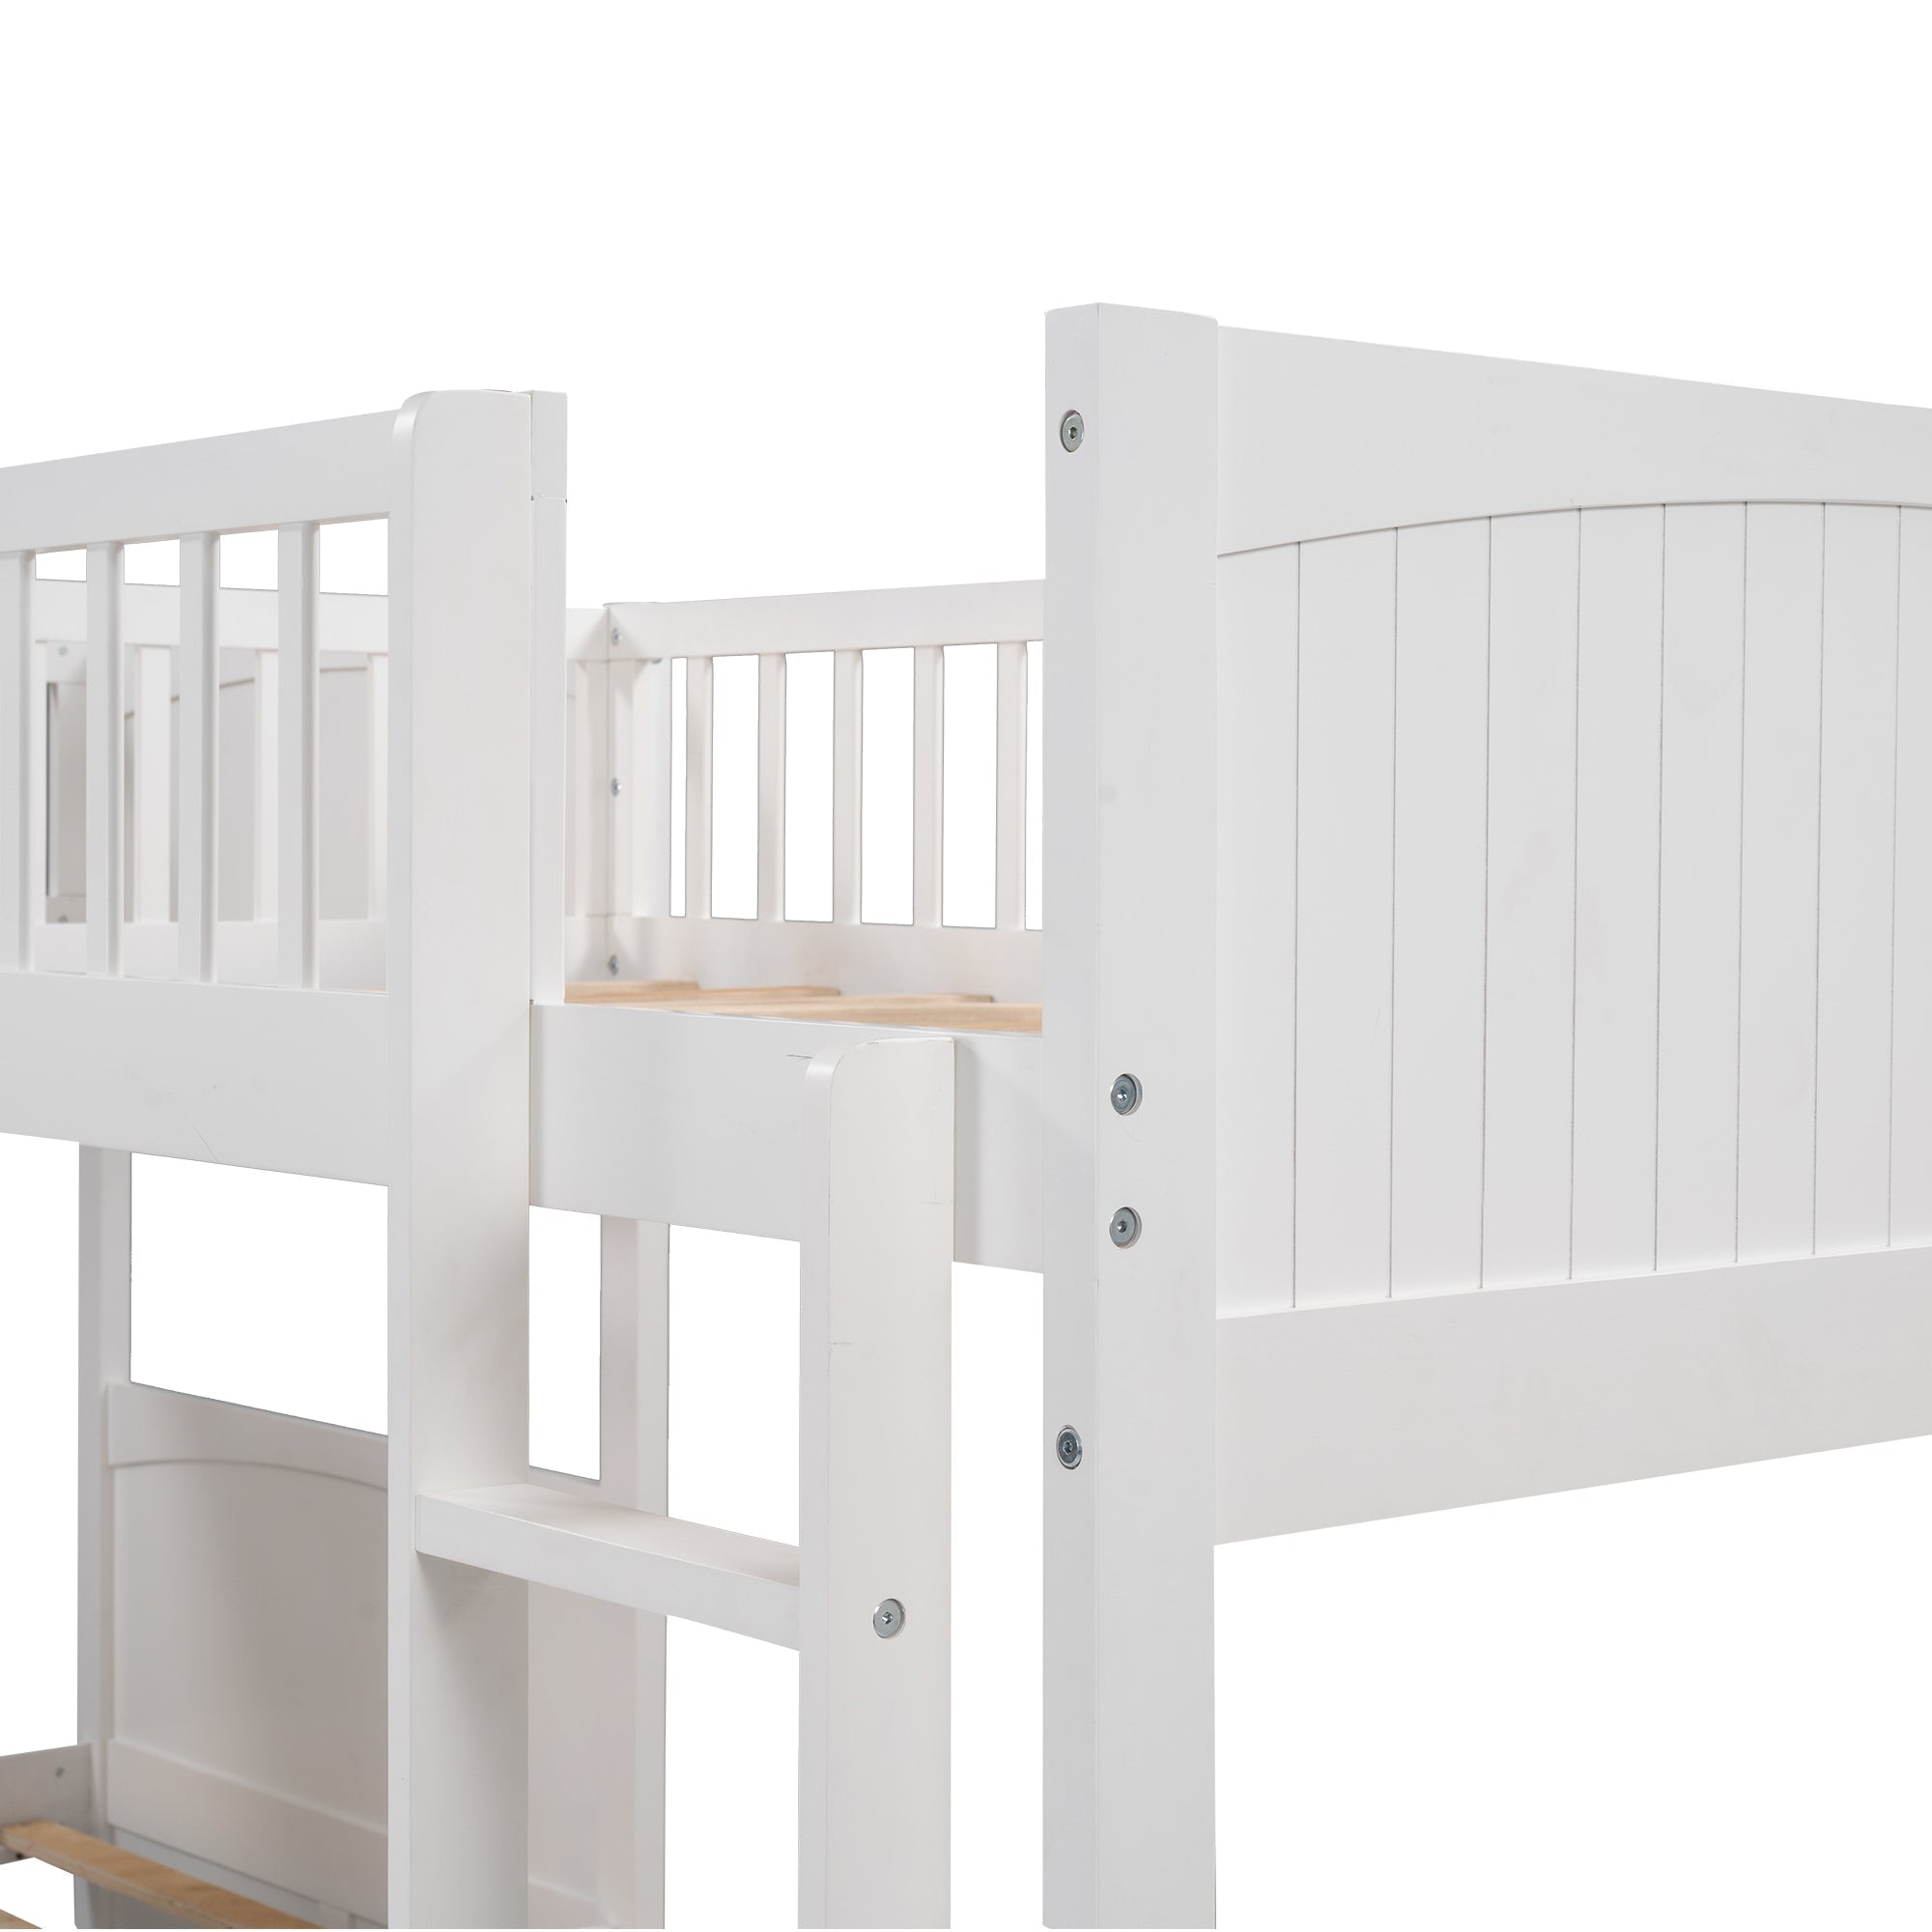 Euroco Wood Bunk Bed Storage, Twin-over-Twin-over-Twin for Children's Bedroom, White